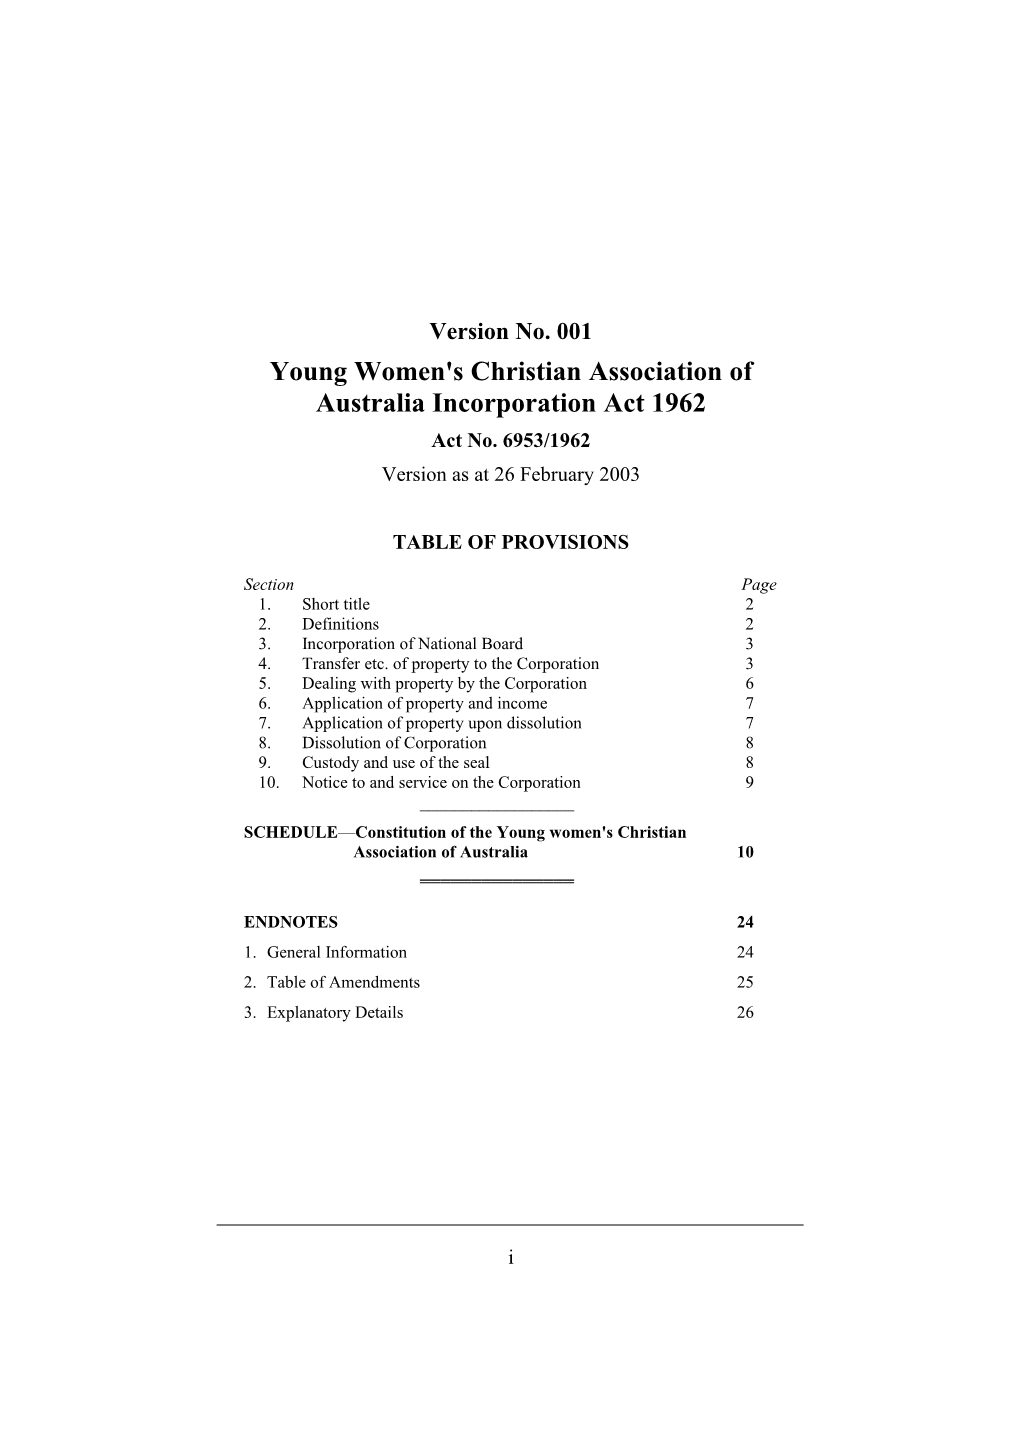 Young Women's Christian Association of Australia Incorporation Act 1962